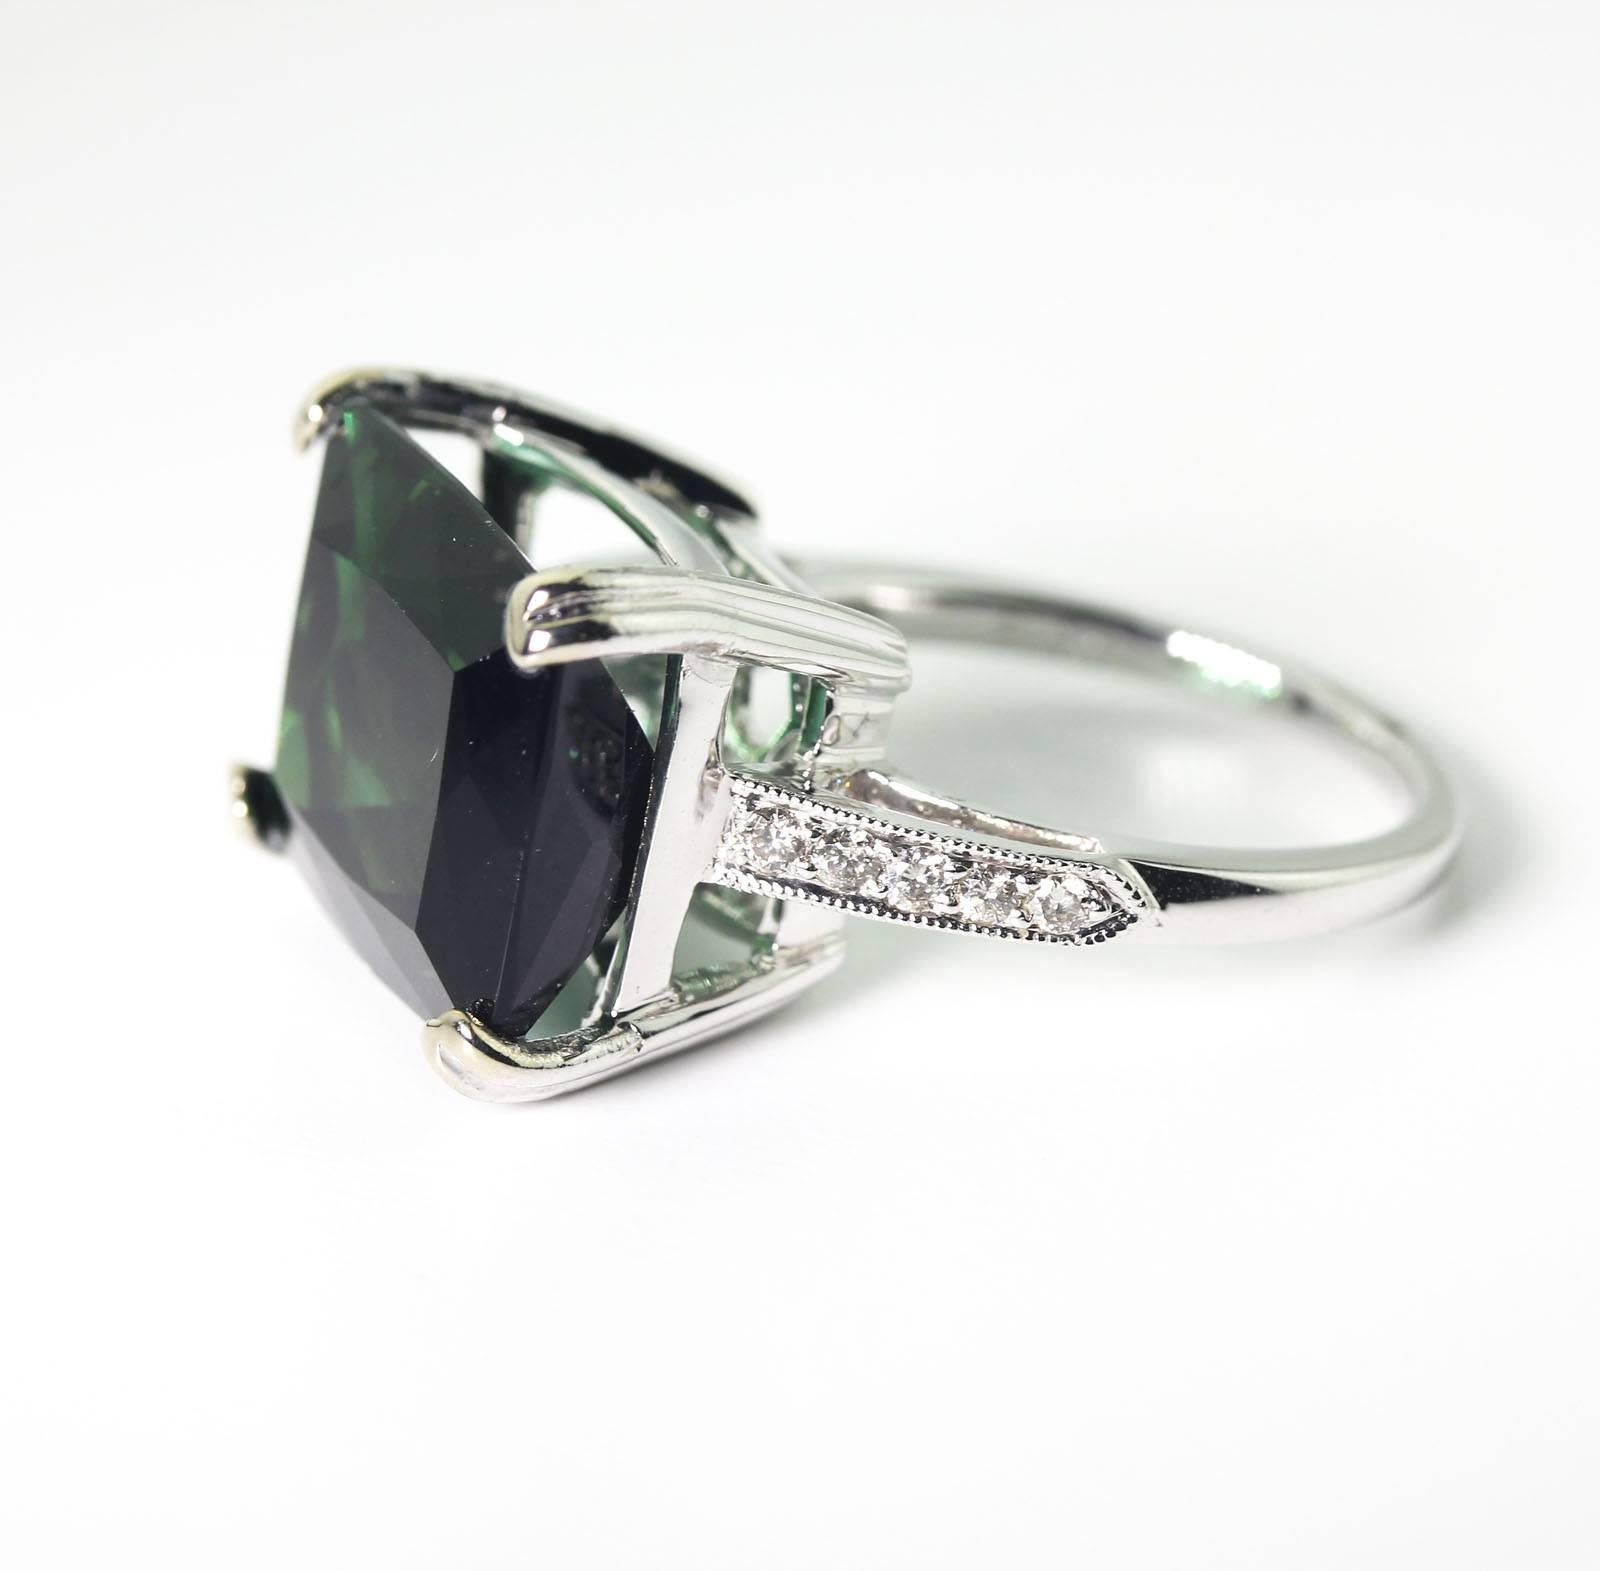 This gorgeous glittering green 9.9 carats of natural Brasilian Tourmaline is enhanced with tiny sparkling white topaz set in 14KT white gold ring.  The handmade unique ring is a size 7 (sizable).  It is so translucent the setting shows through the